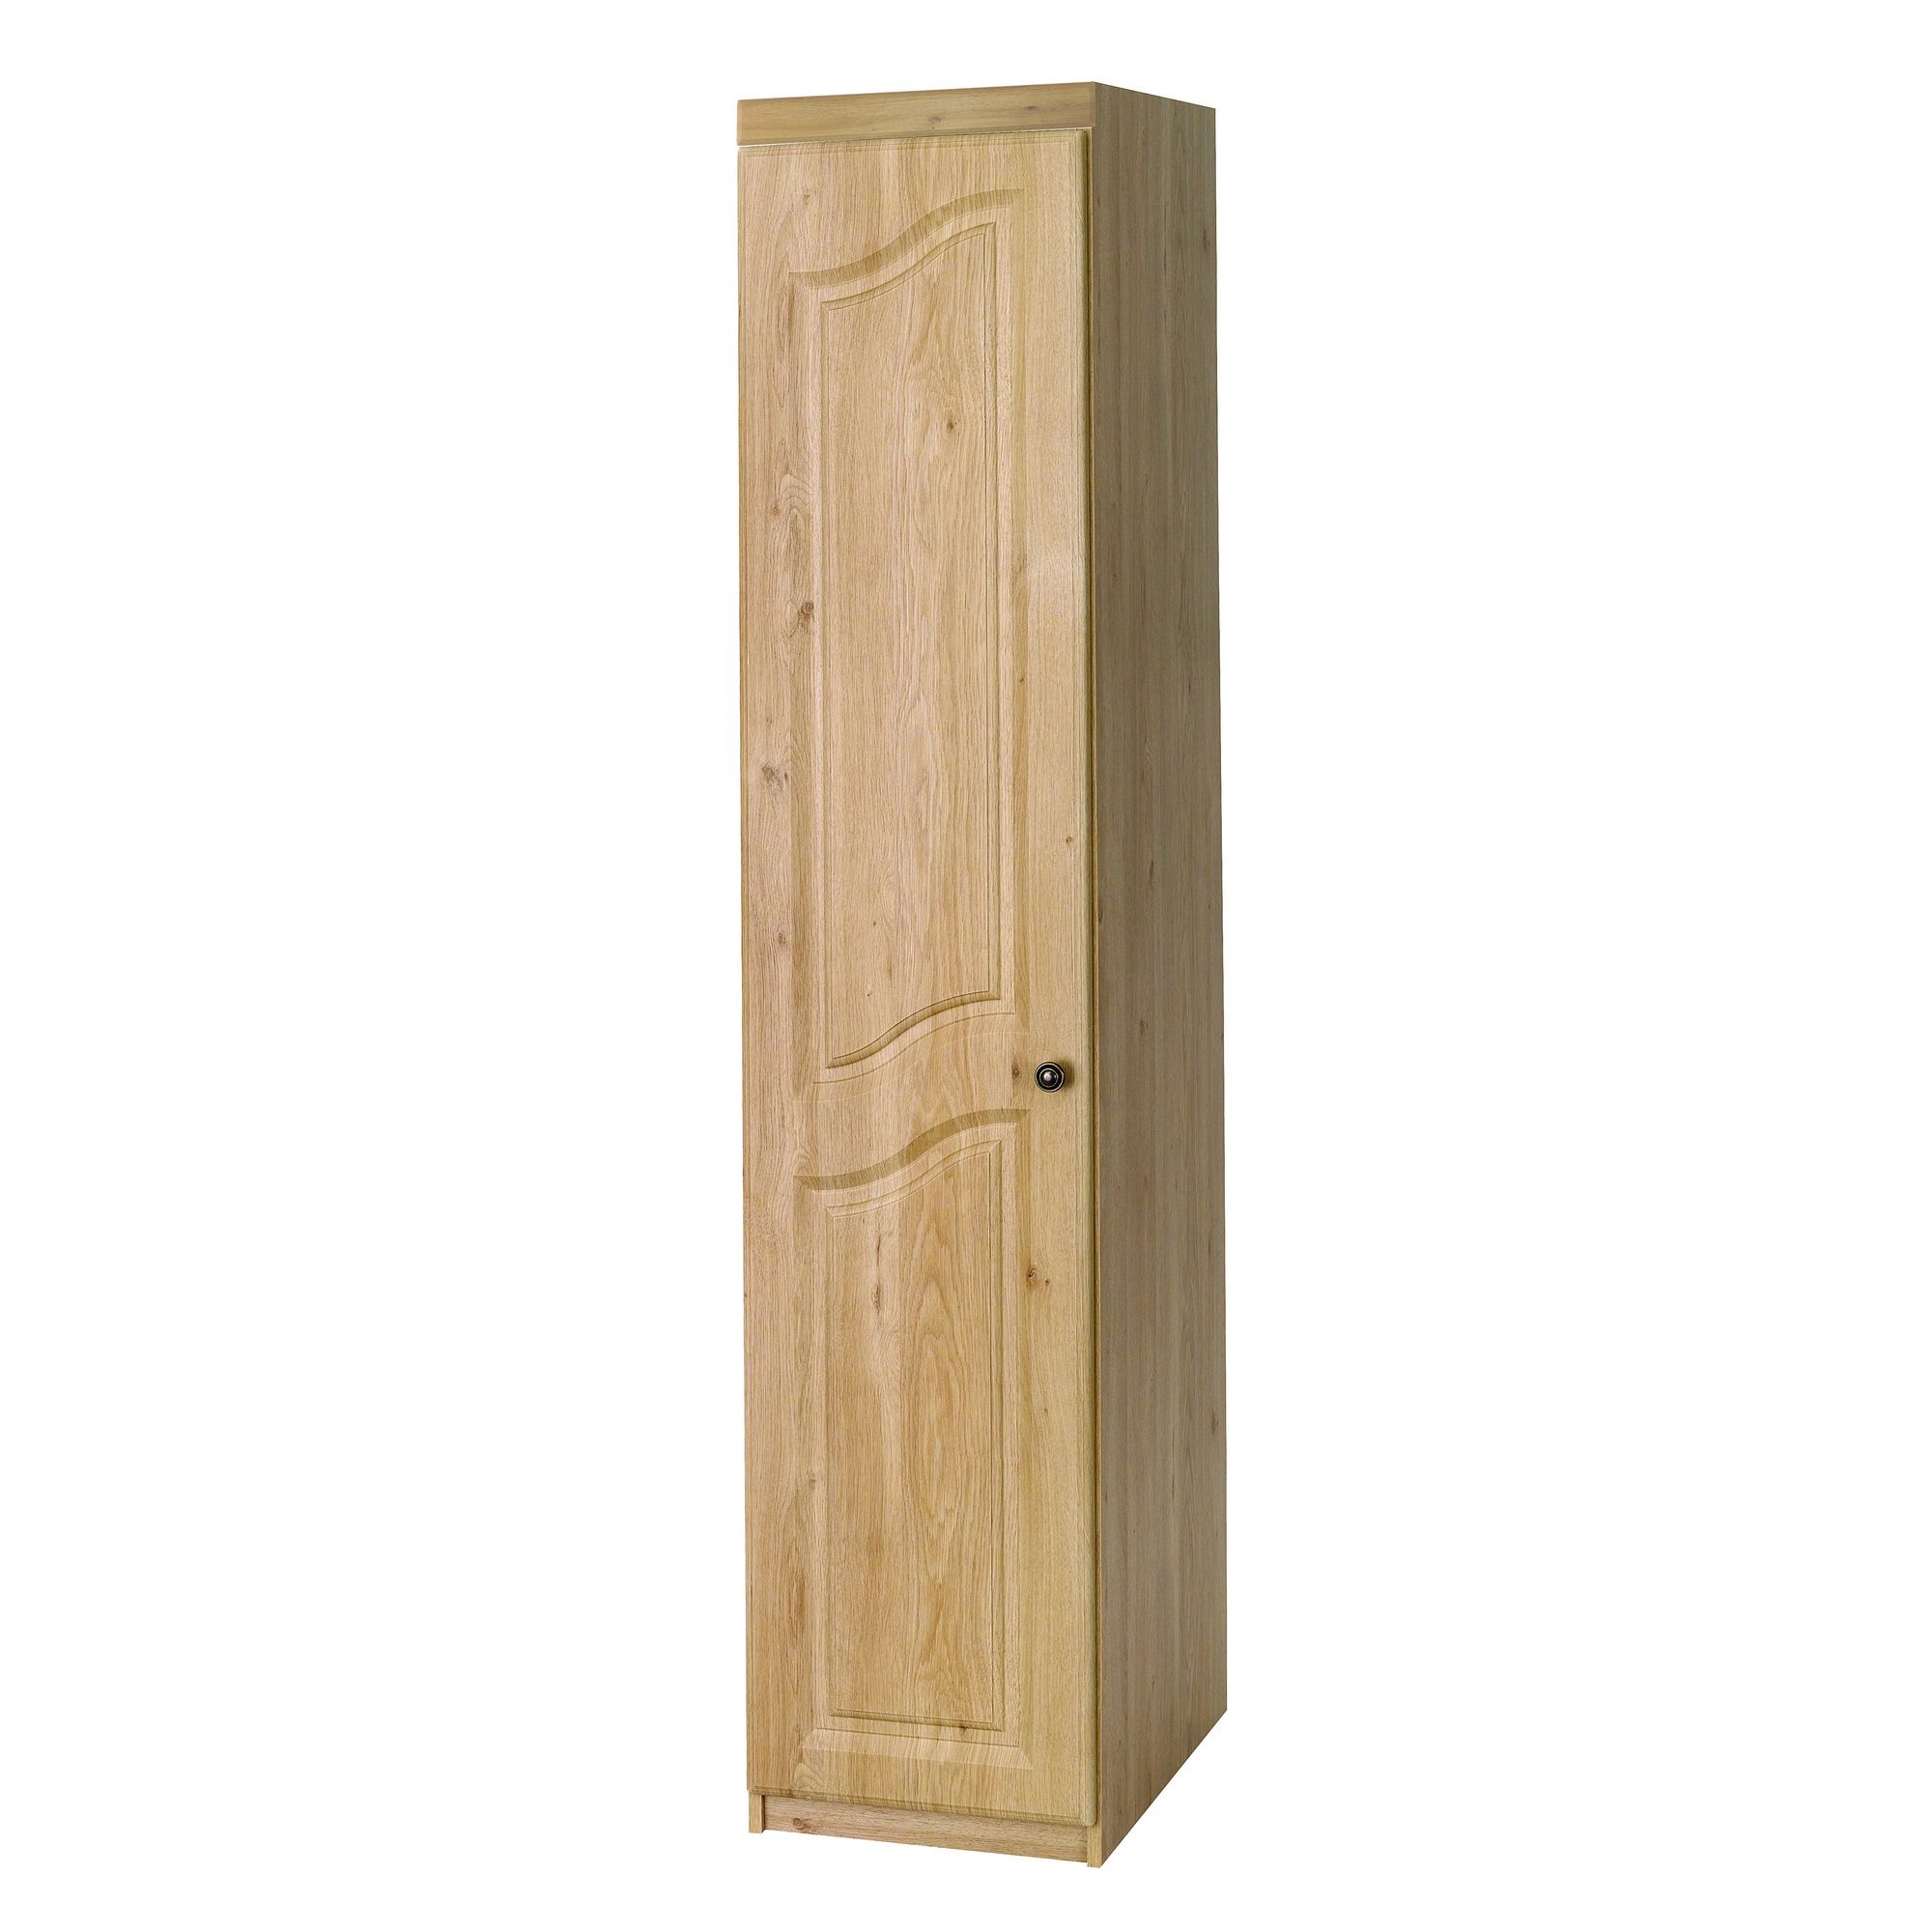 Alto Furniture Visualise Bordeaux Single Robe in Oak with Light Front at Tesco Direct